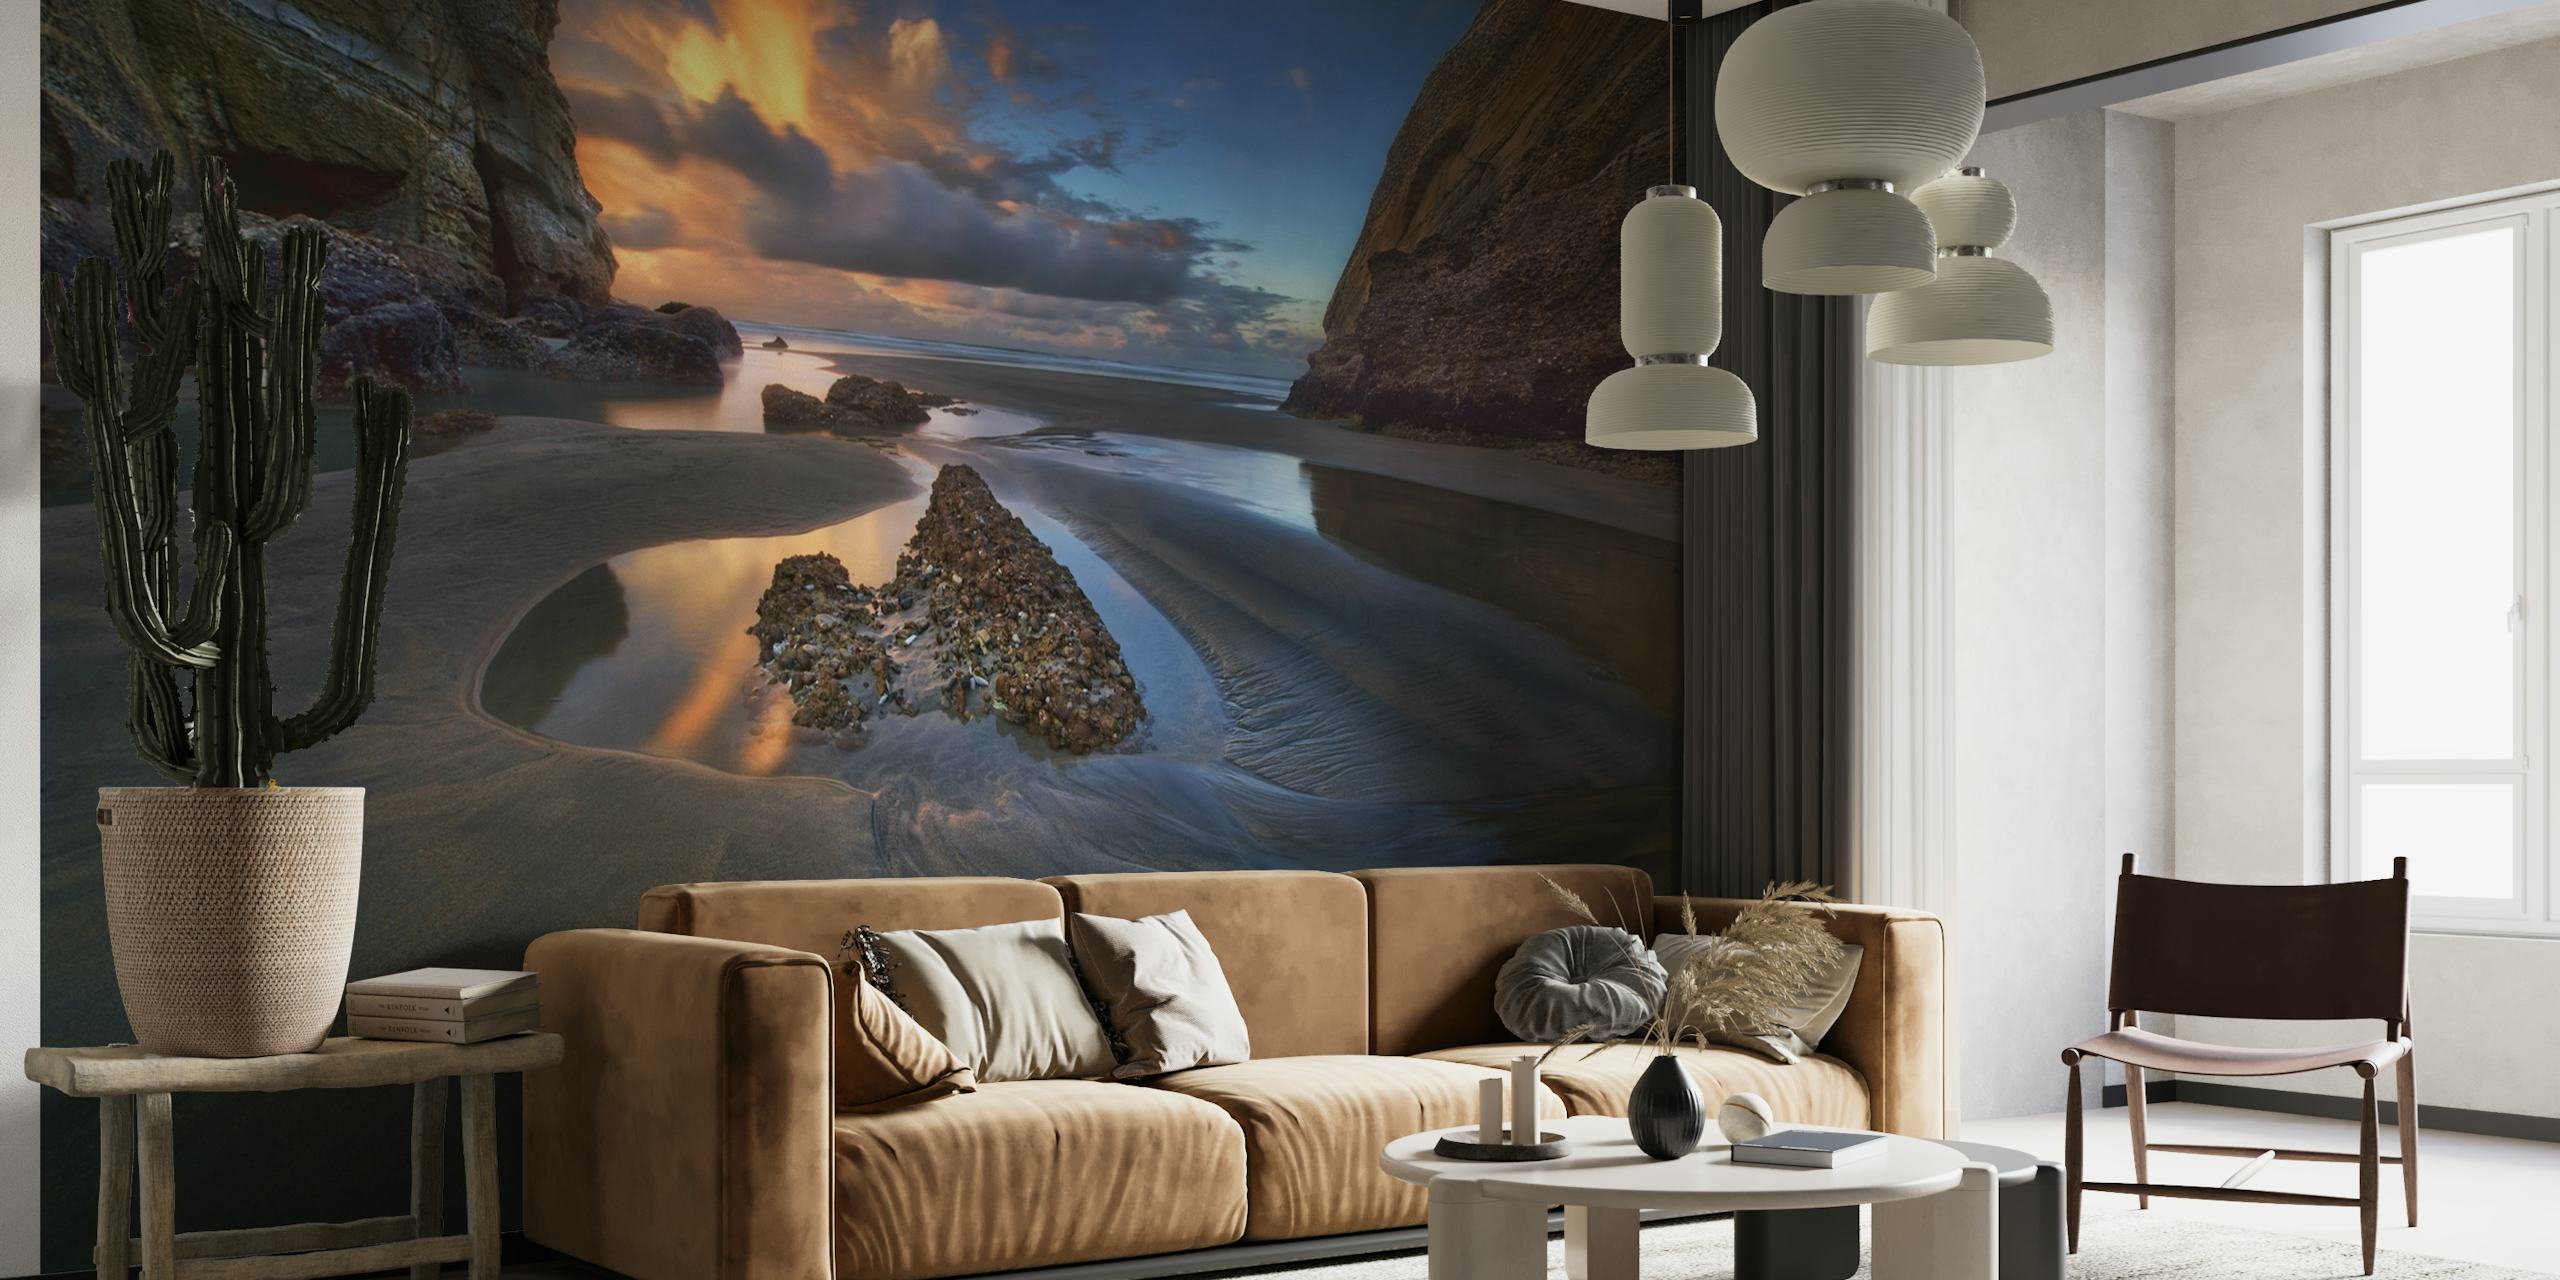 Stunning seascape wall mural with sunset and receding tide exposing rocks and tranquil water pools